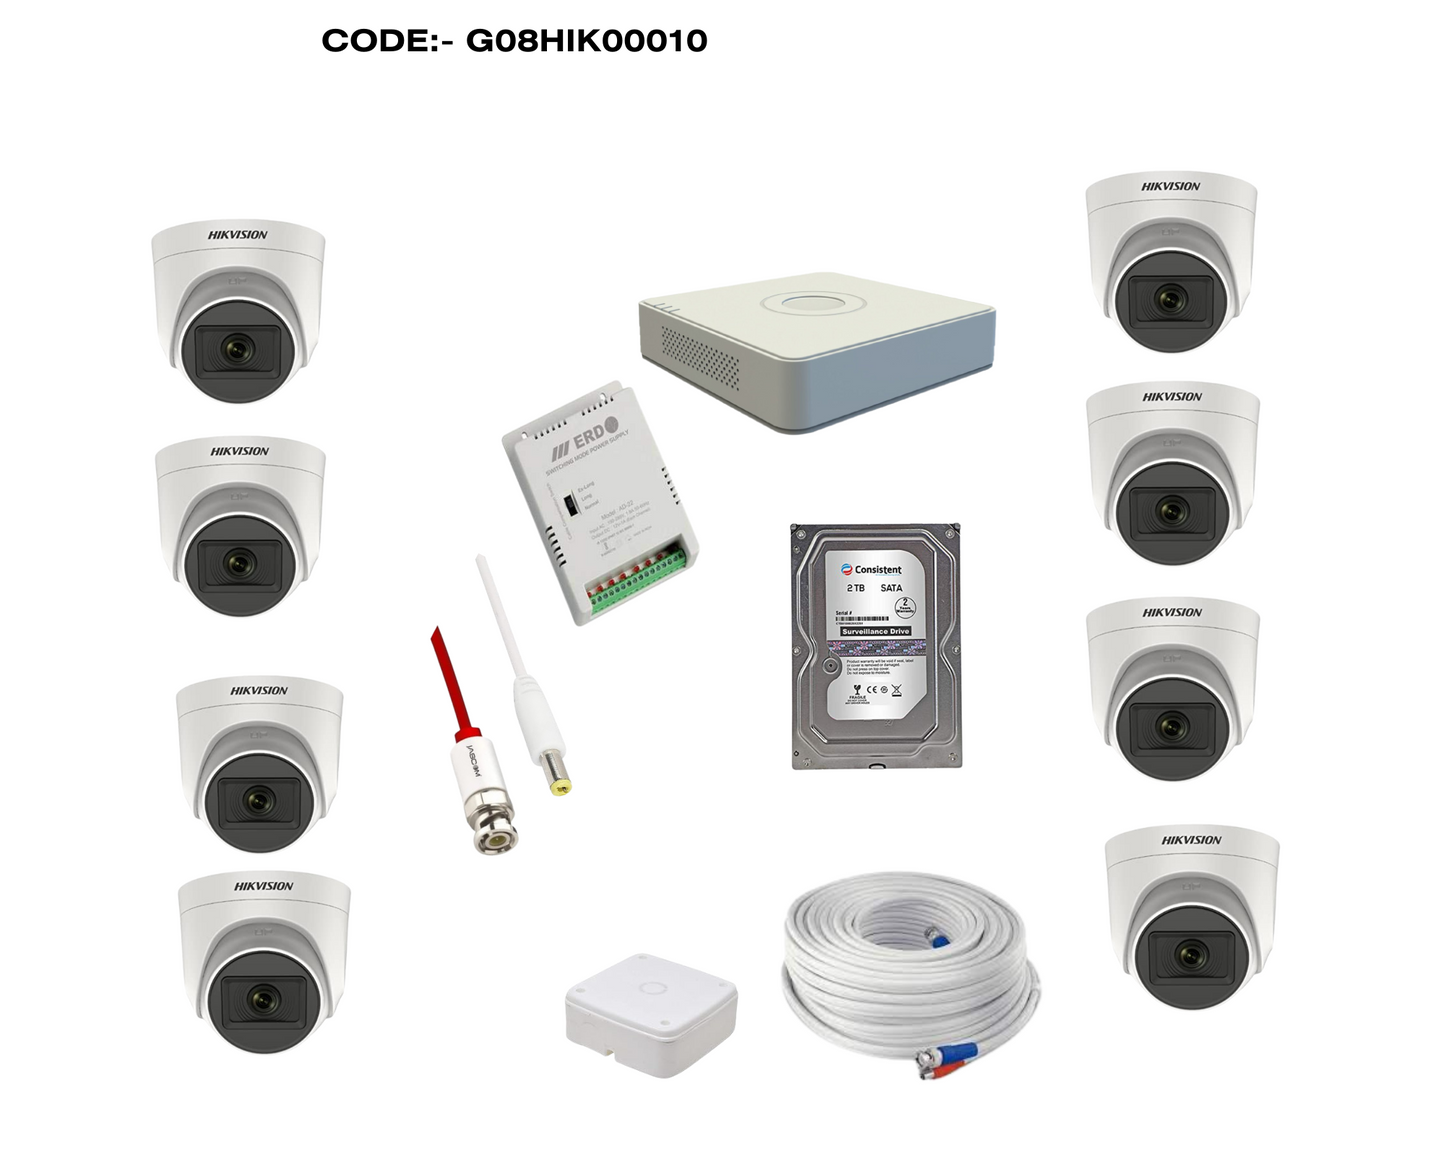 HIKVISION 5MP CCTV CAMERA KIT 8 CHANNEL DVR 8 DOME CAMERAS WITH AUDIO MIC FULL COMBO KIT CODE:- G08HIK00010